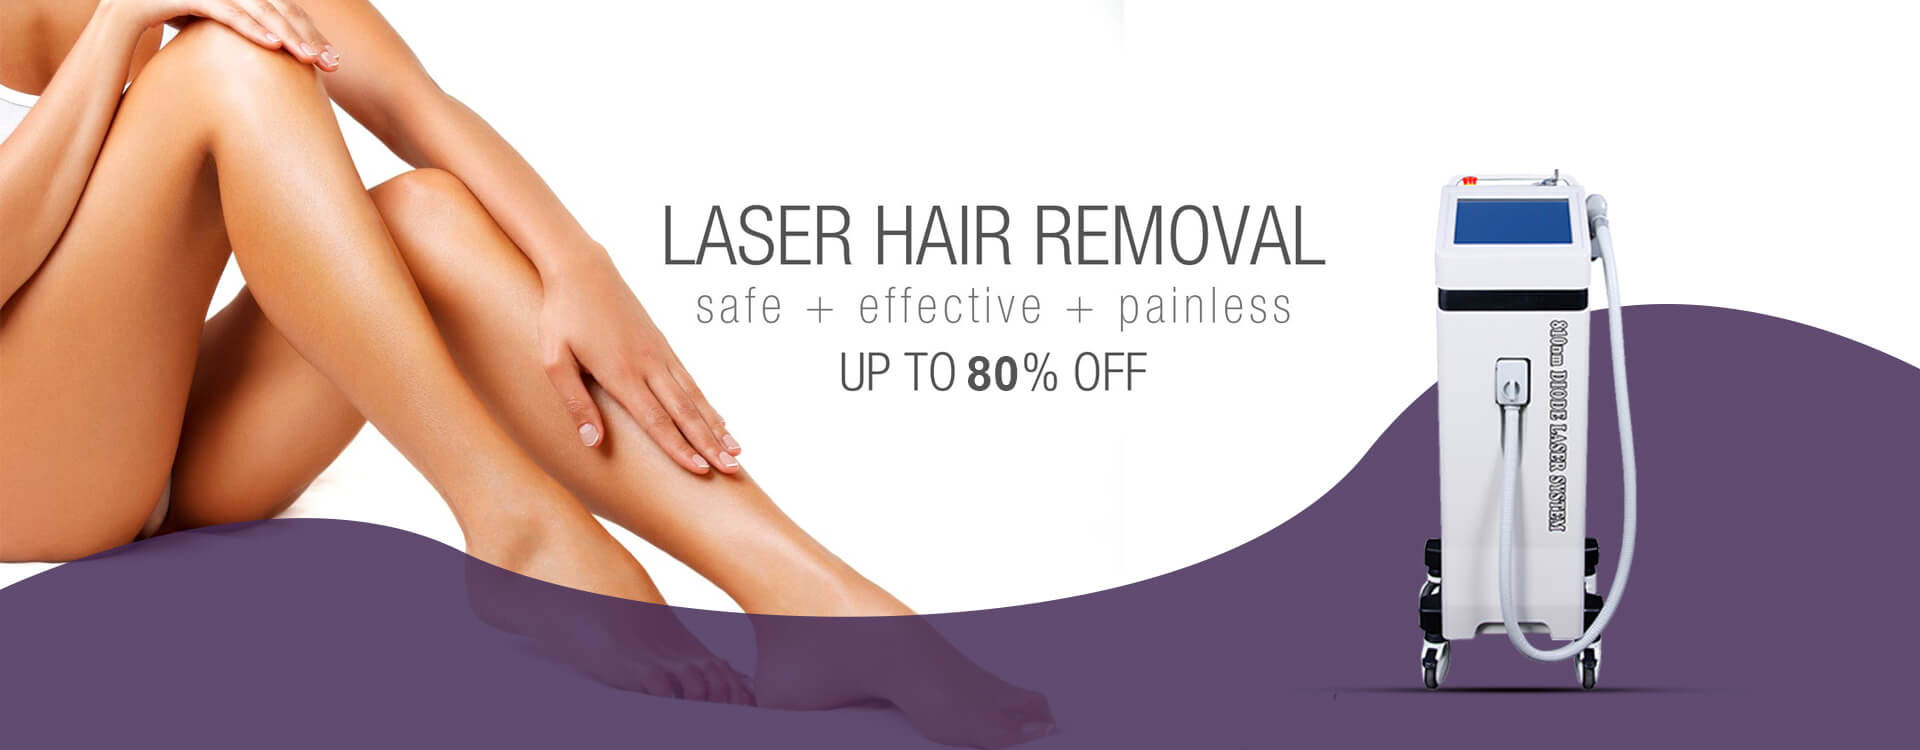 Laser Hair Removal Price Guide